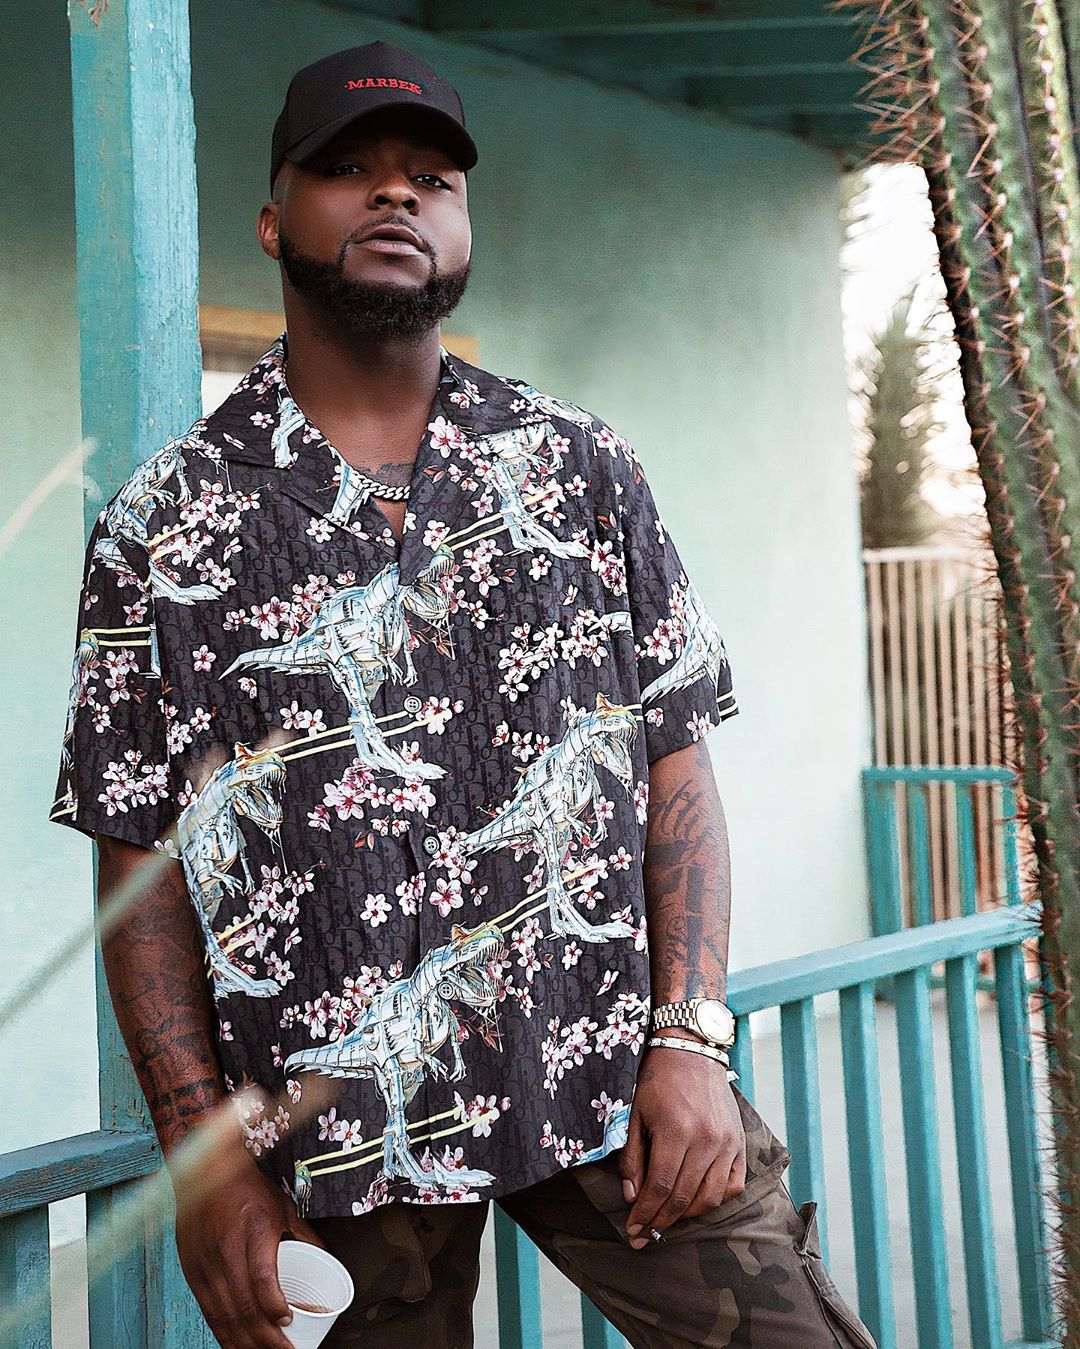 The Most Note-Worthy Style Moments From The Davido x Chris Brown 